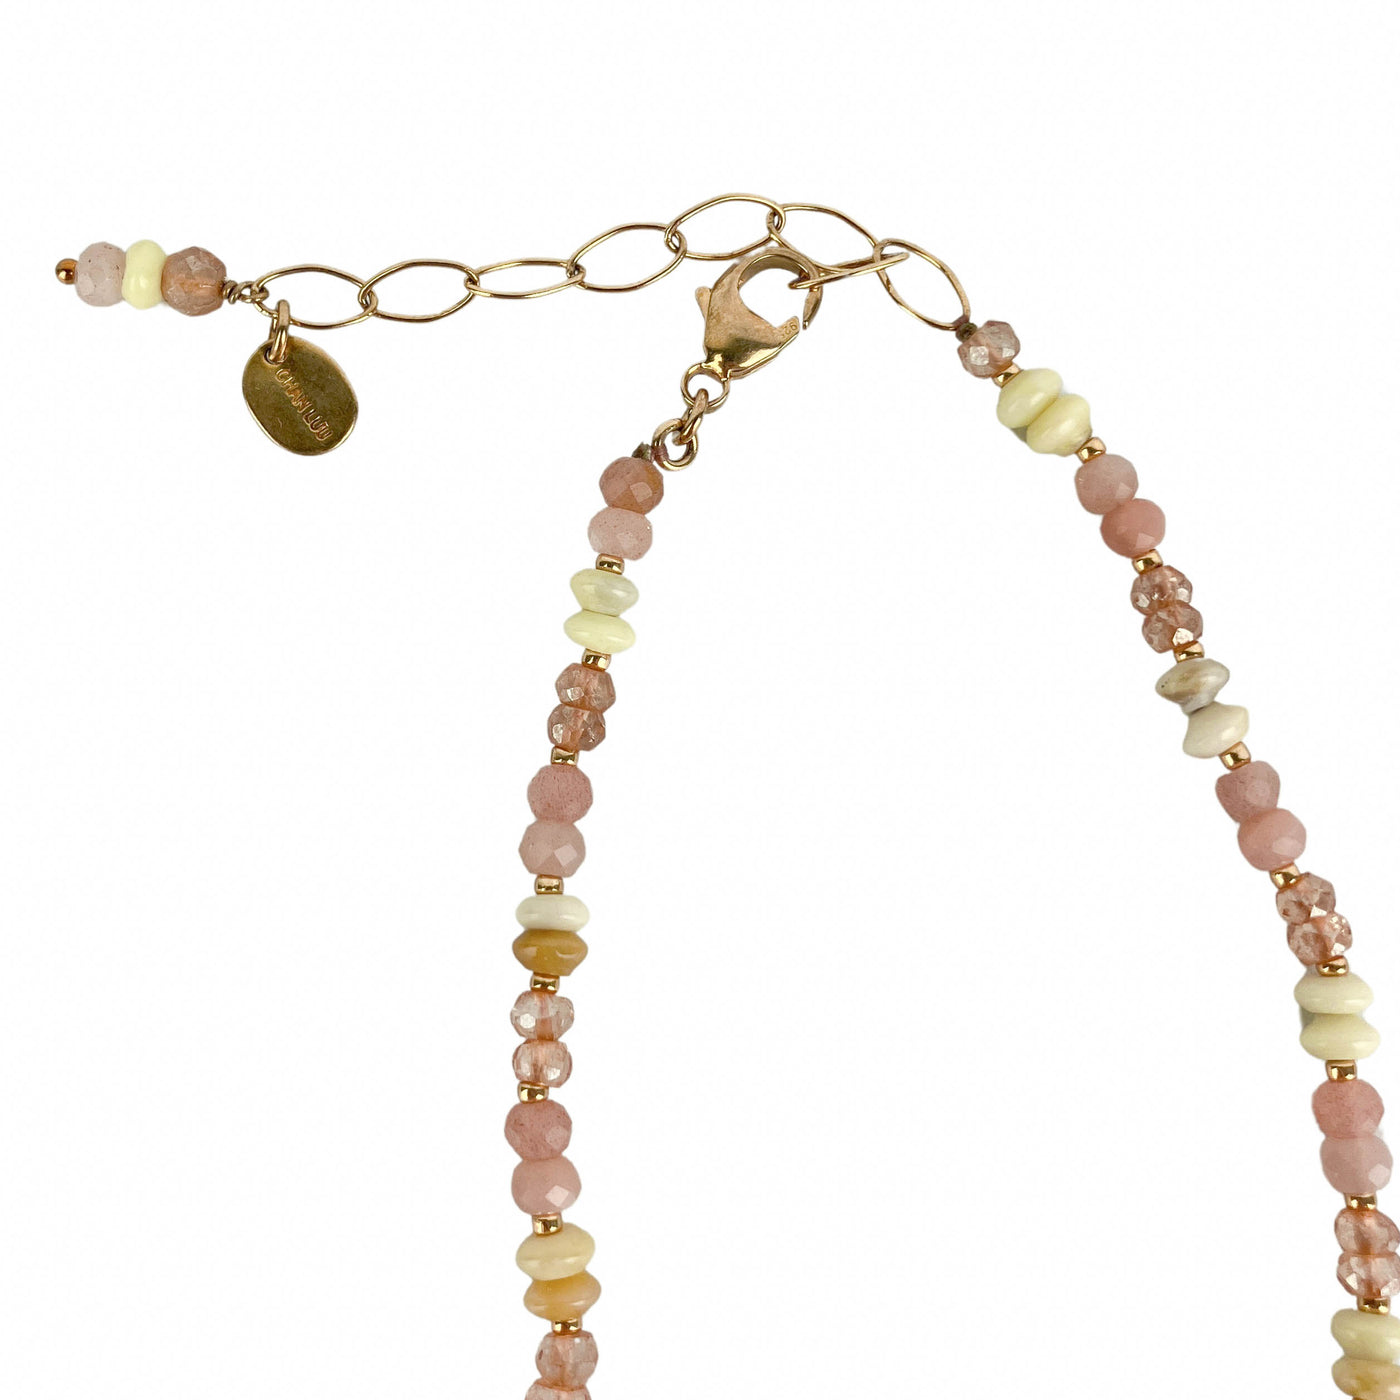 Chan Luu Grand Odyssey Necklace in Citrine Mix - Discounts on Chan Luu at UAL